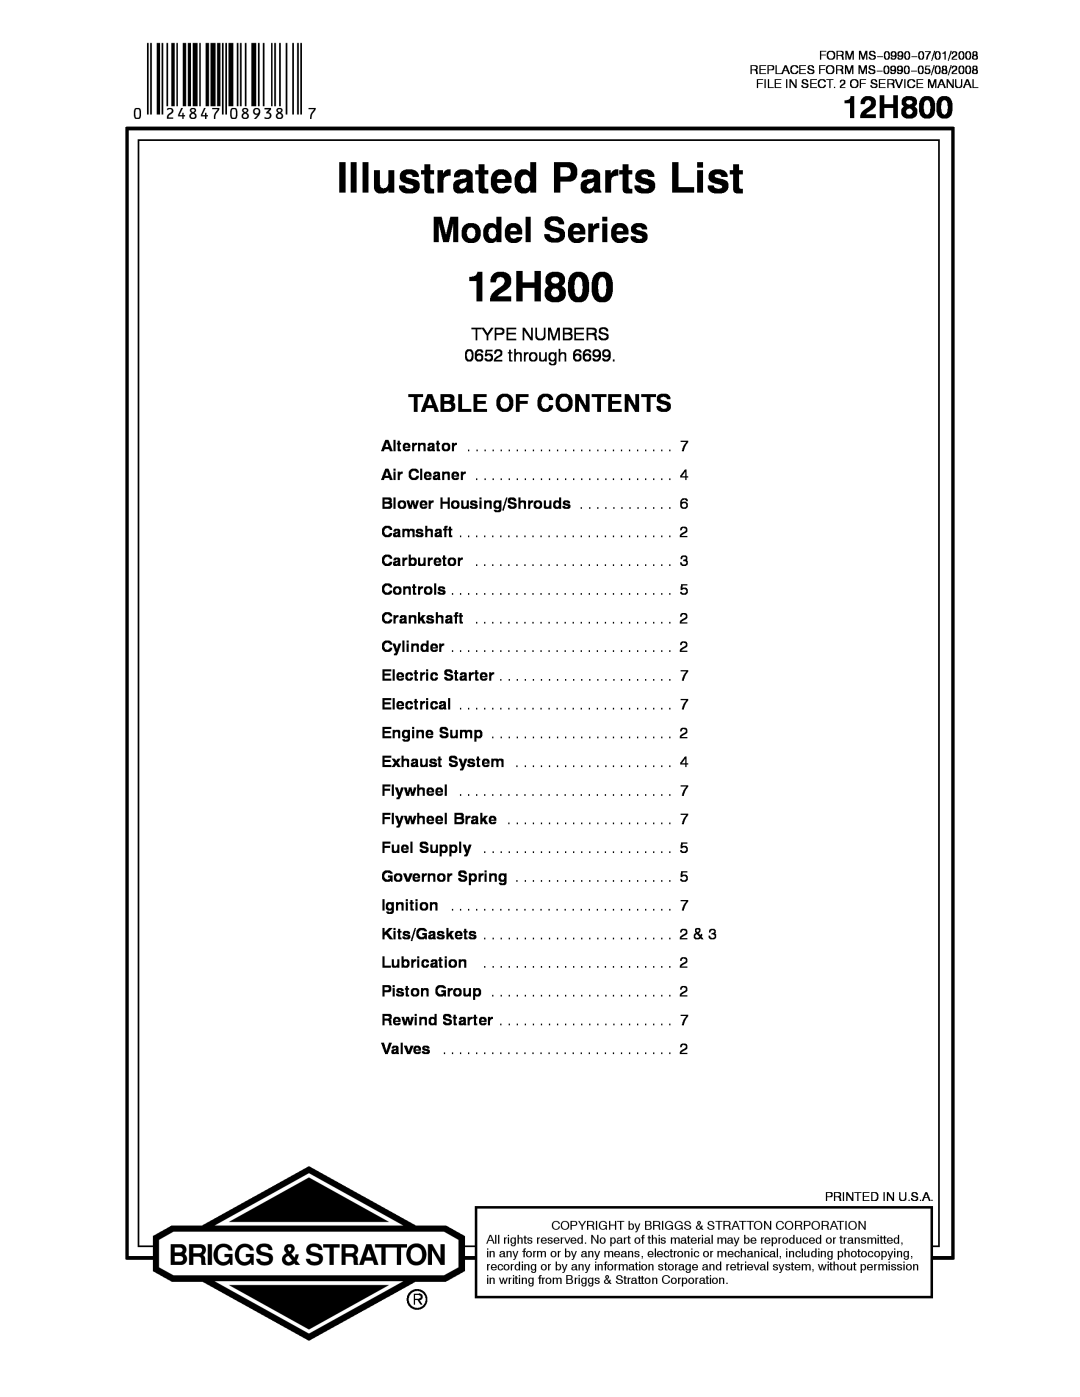 Briggs & Stratton 12H800 service manual Illustrated Parts List, Model Series, Table Of Contents, TYPE NUMBERS 0652 through 